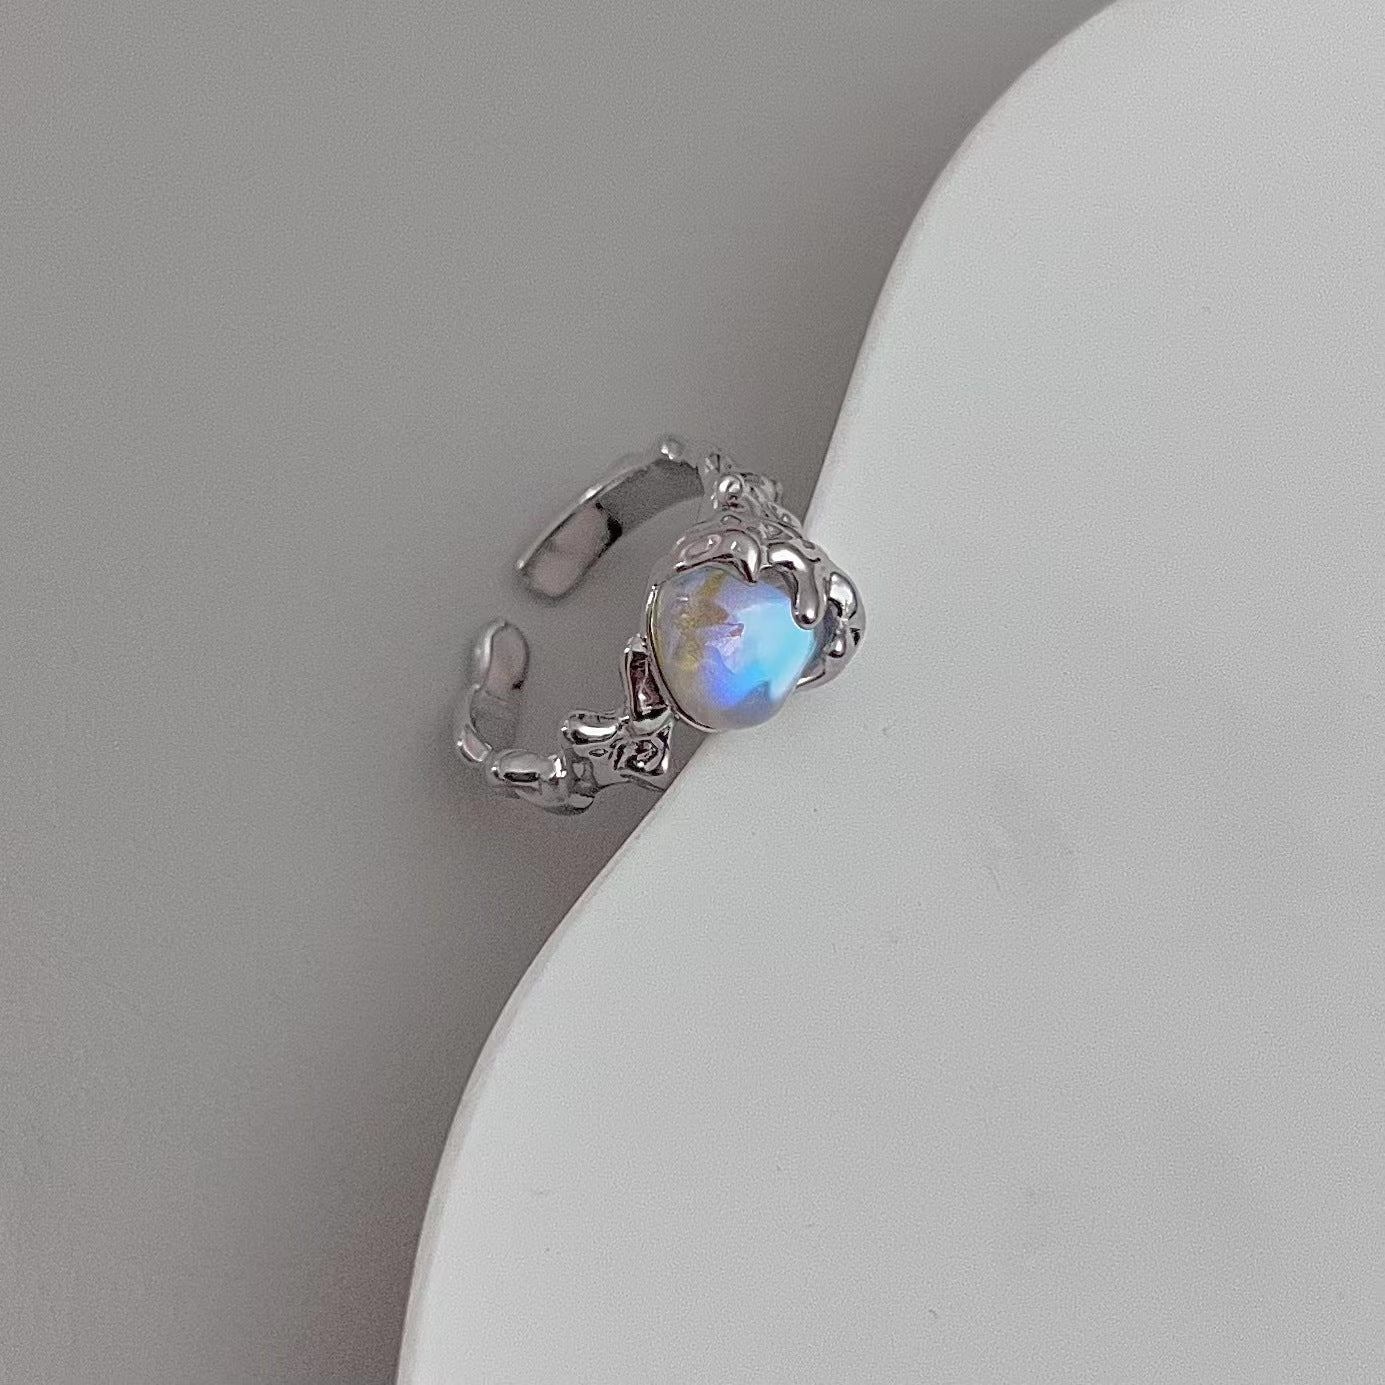 Homemade Moonlight Stone series niche design ring with adjustable opening and diamond inlay design feel ring